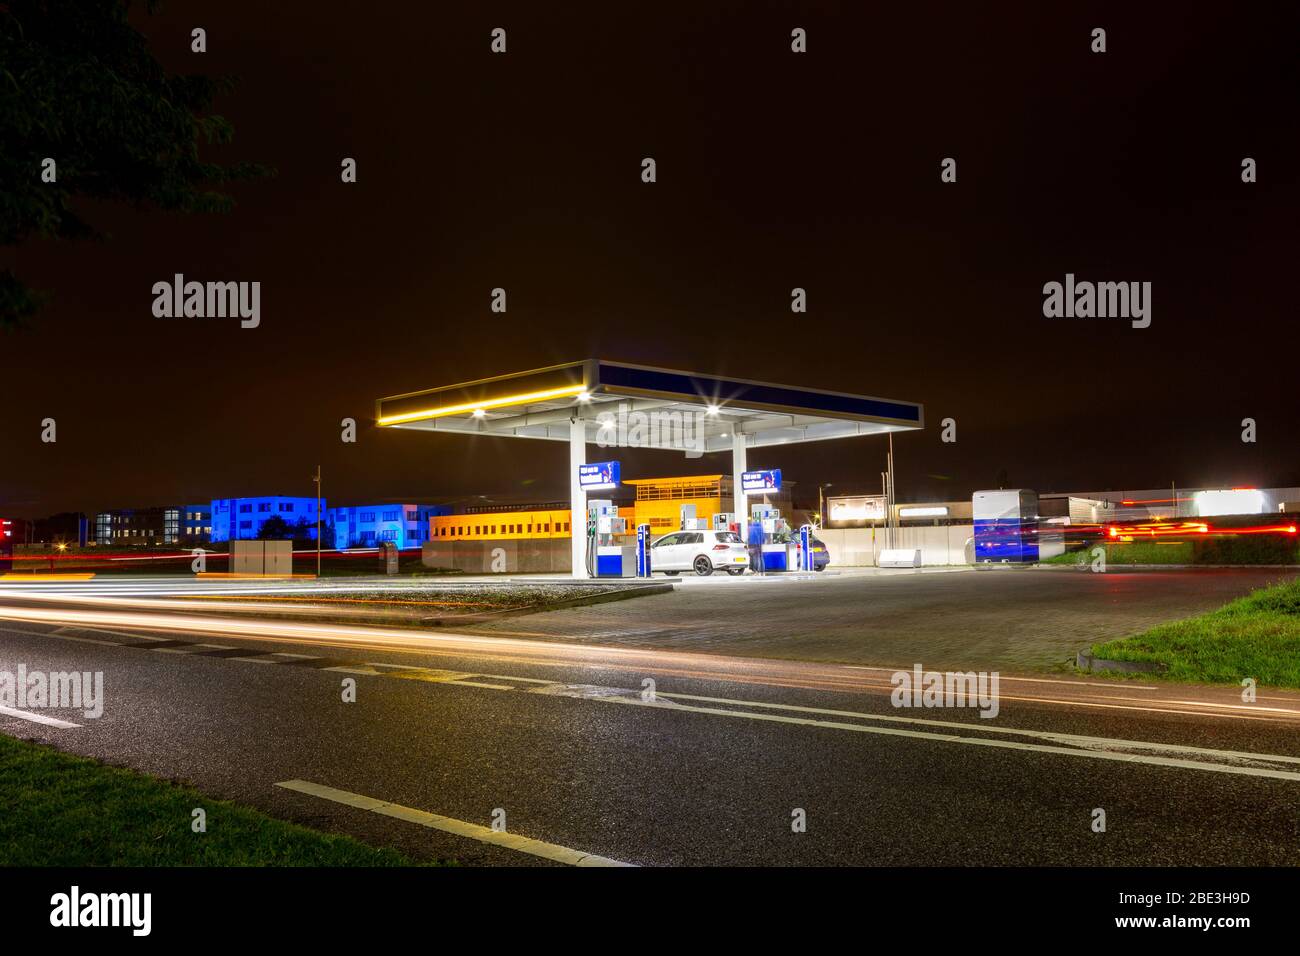 Evening at a selfservice gas station at the A44 highway in Sassenheim the Netherlands. Stock Photo